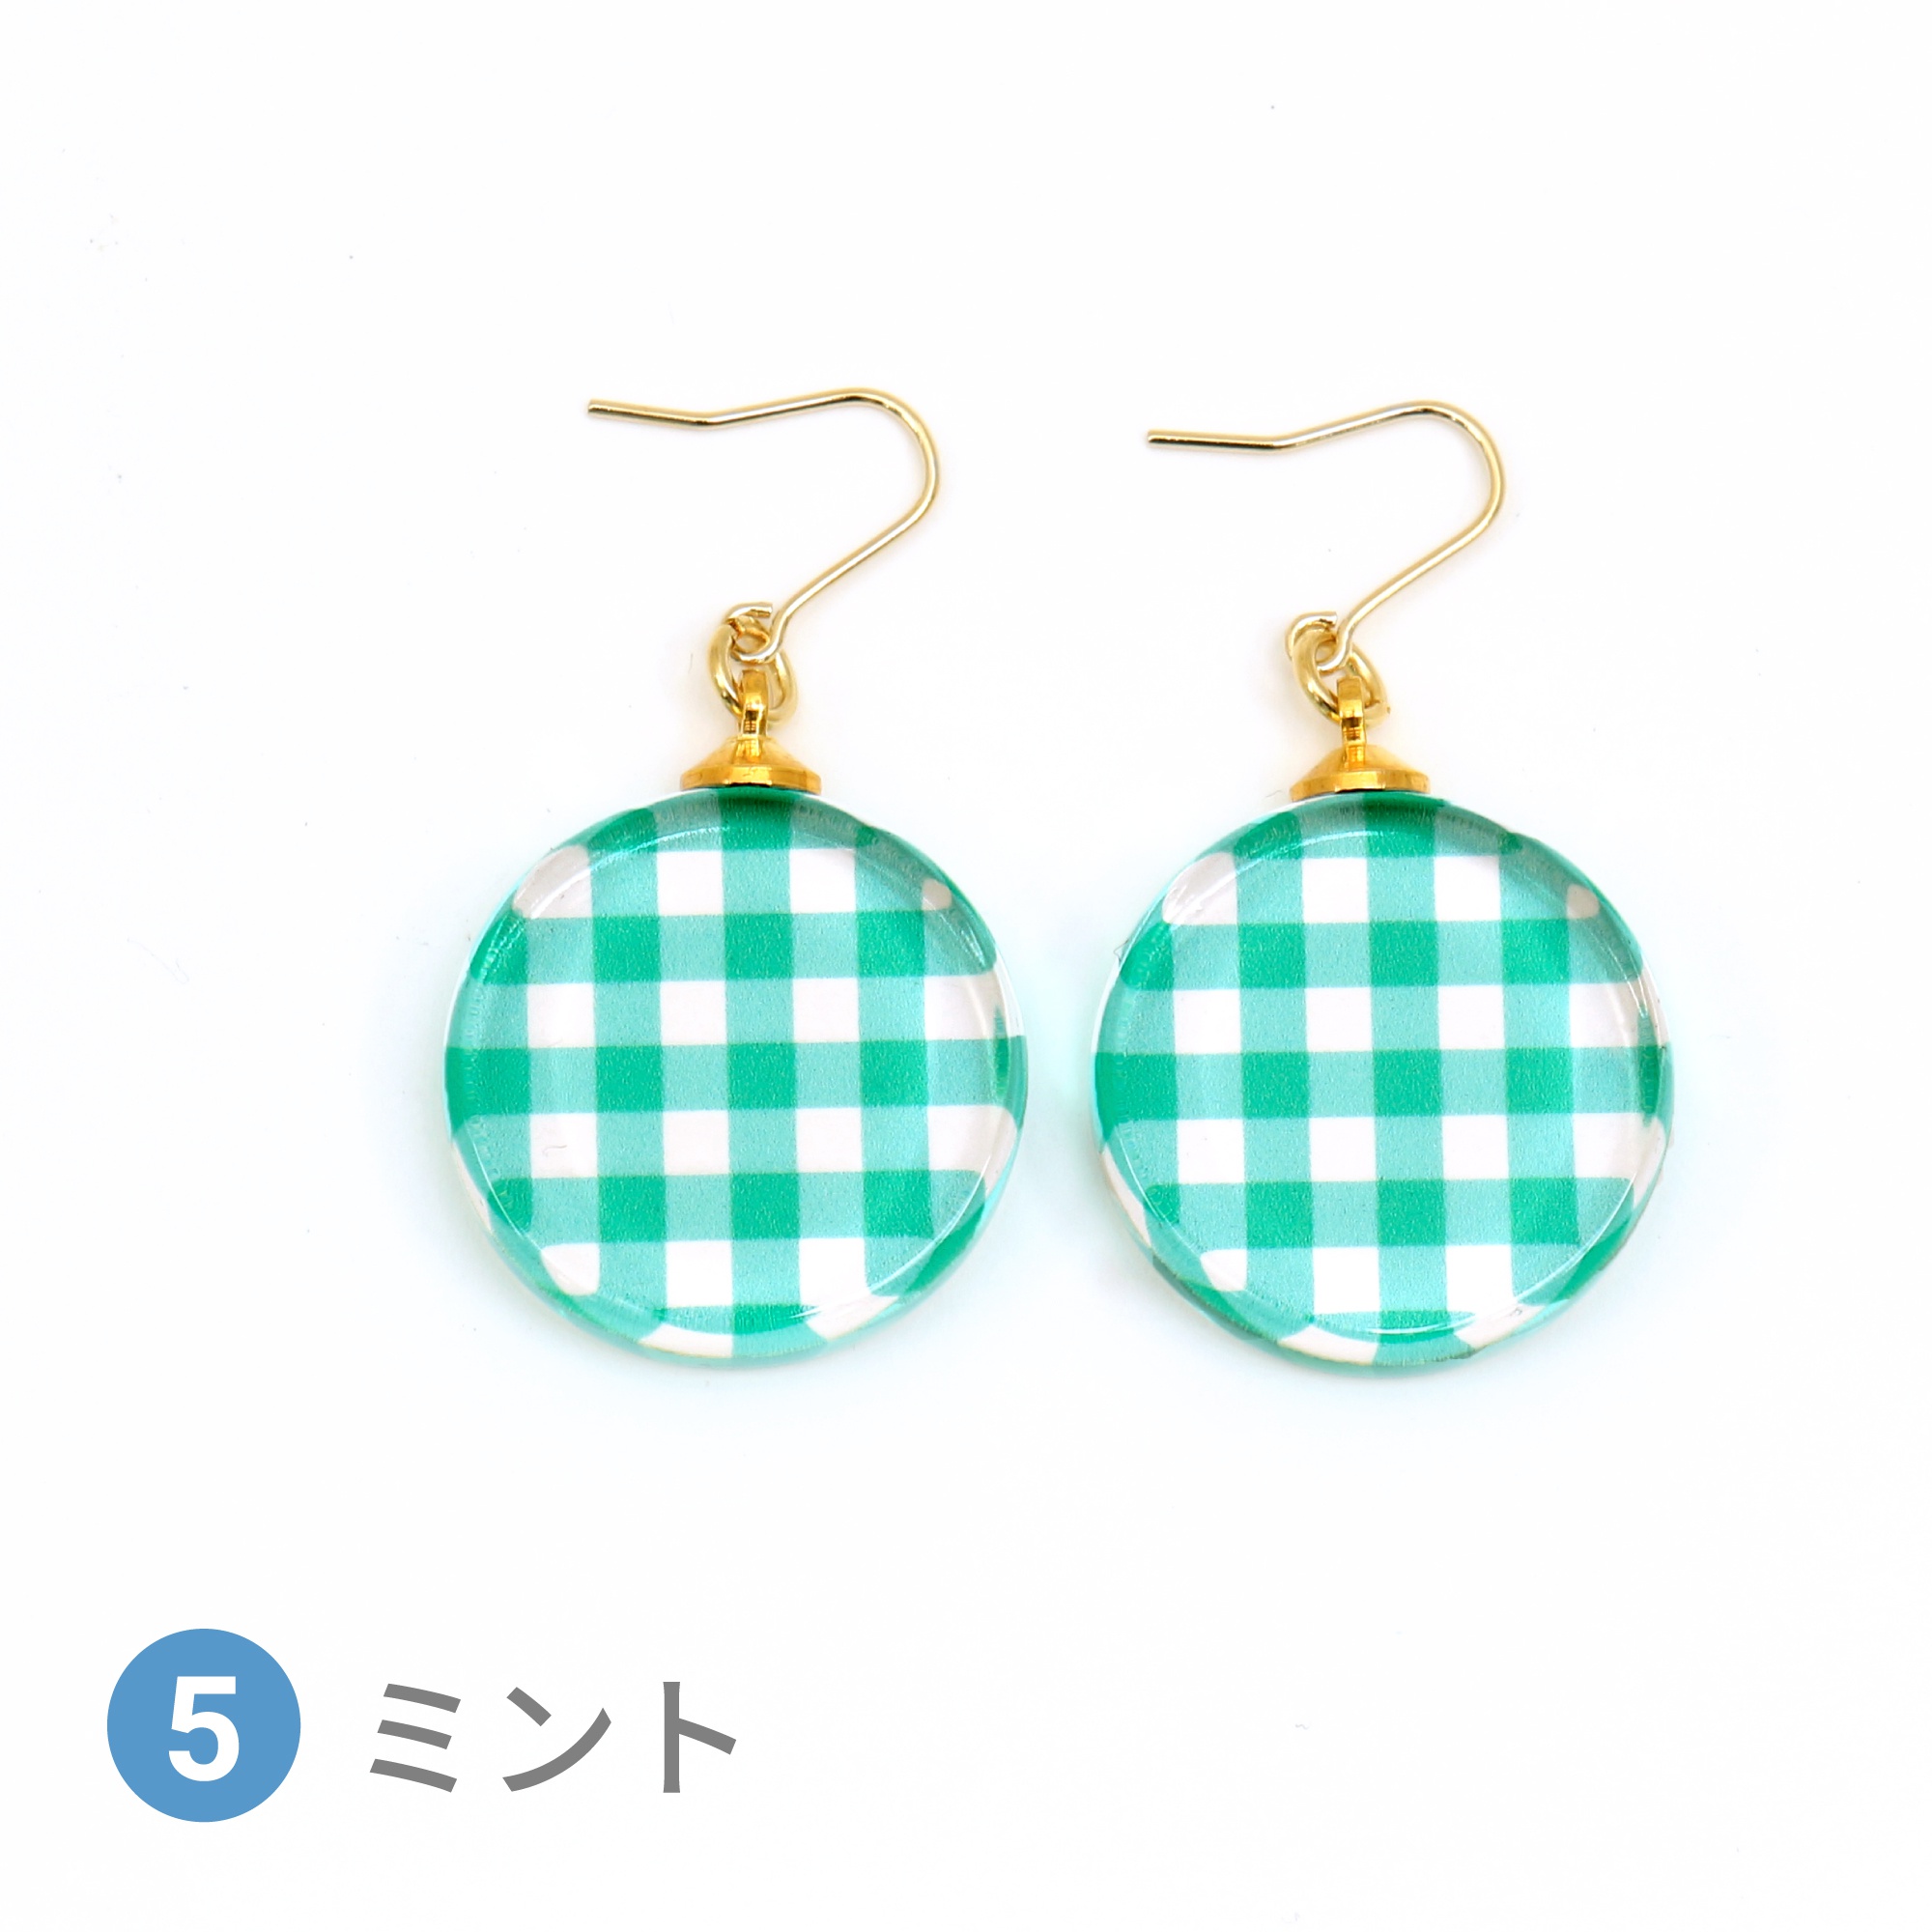 Glass accessories Pierced Earring GINGHAM CHECK mint round shape